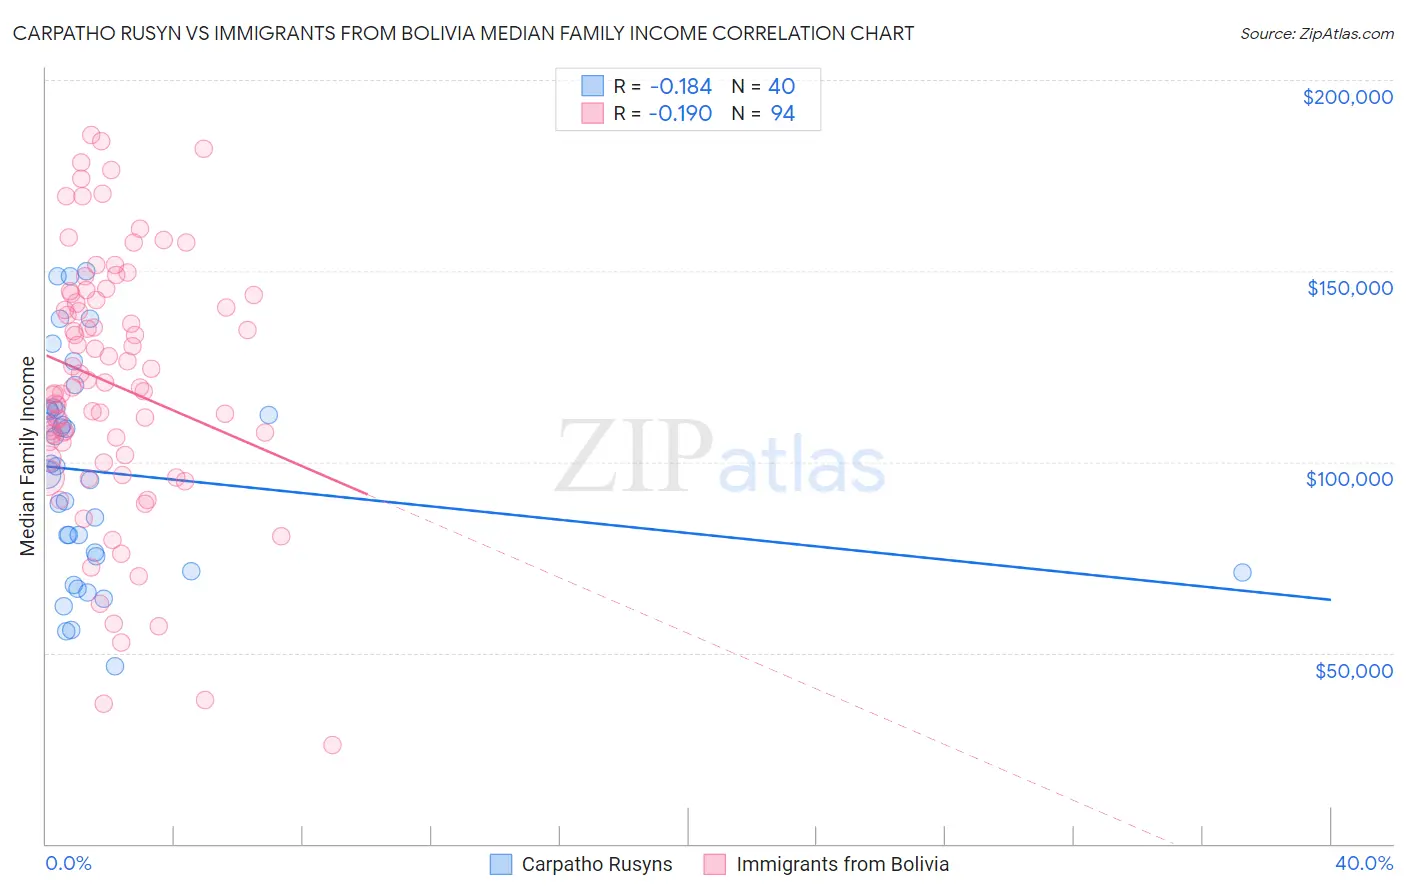 Carpatho Rusyn vs Immigrants from Bolivia Median Family Income